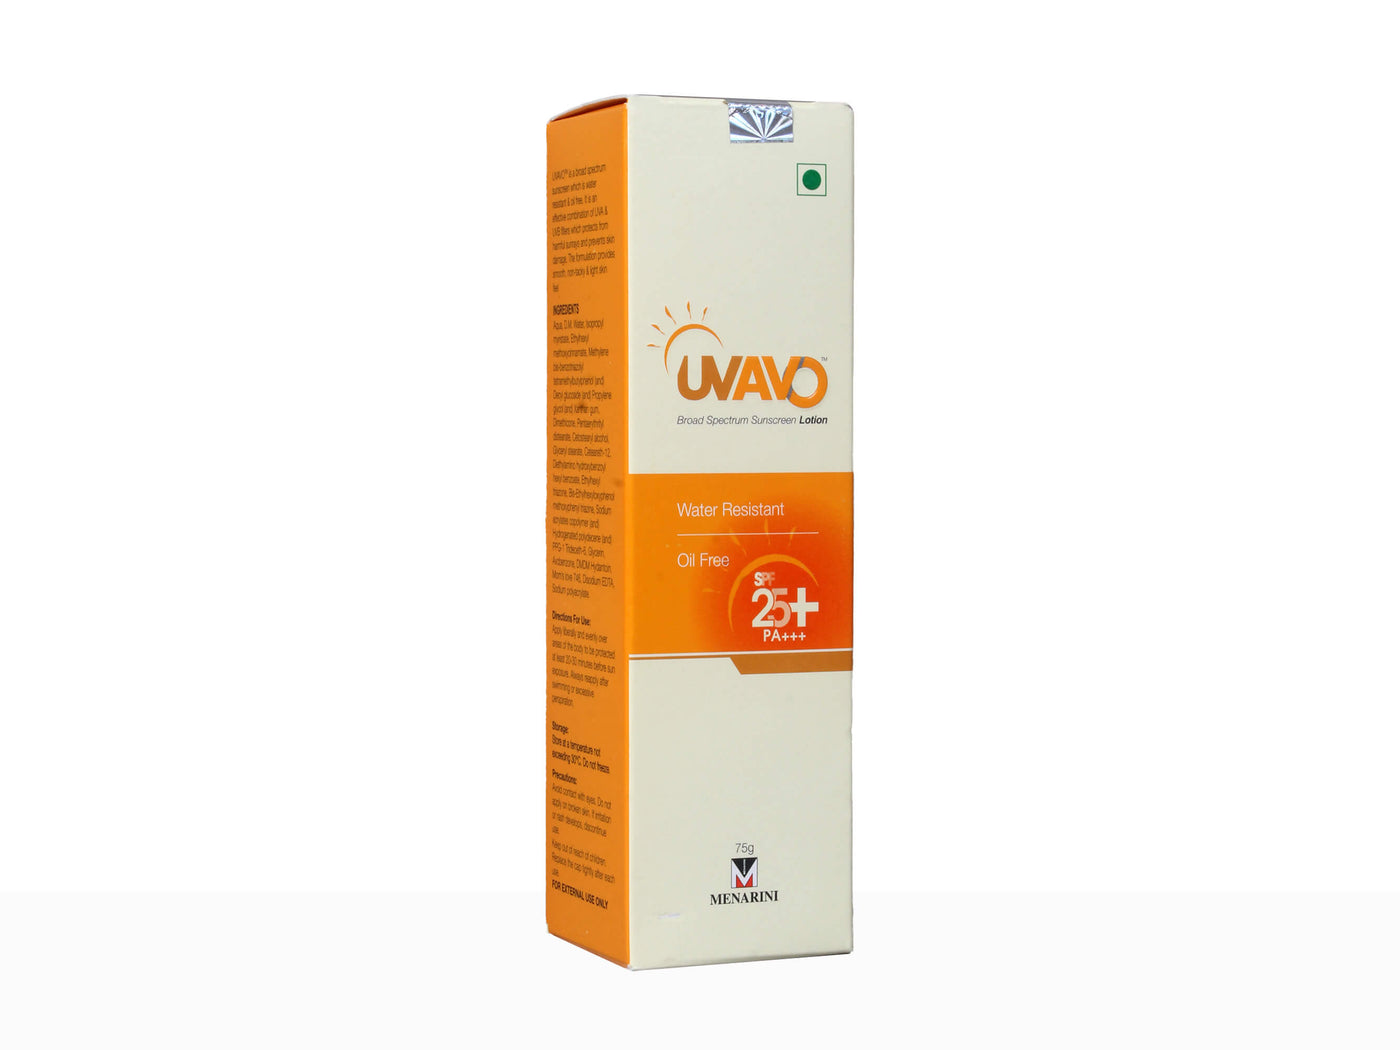 Uvavo Water Resistant Oil Free Sunscreen Lotion SPF 25 PA+++ - Clinikally